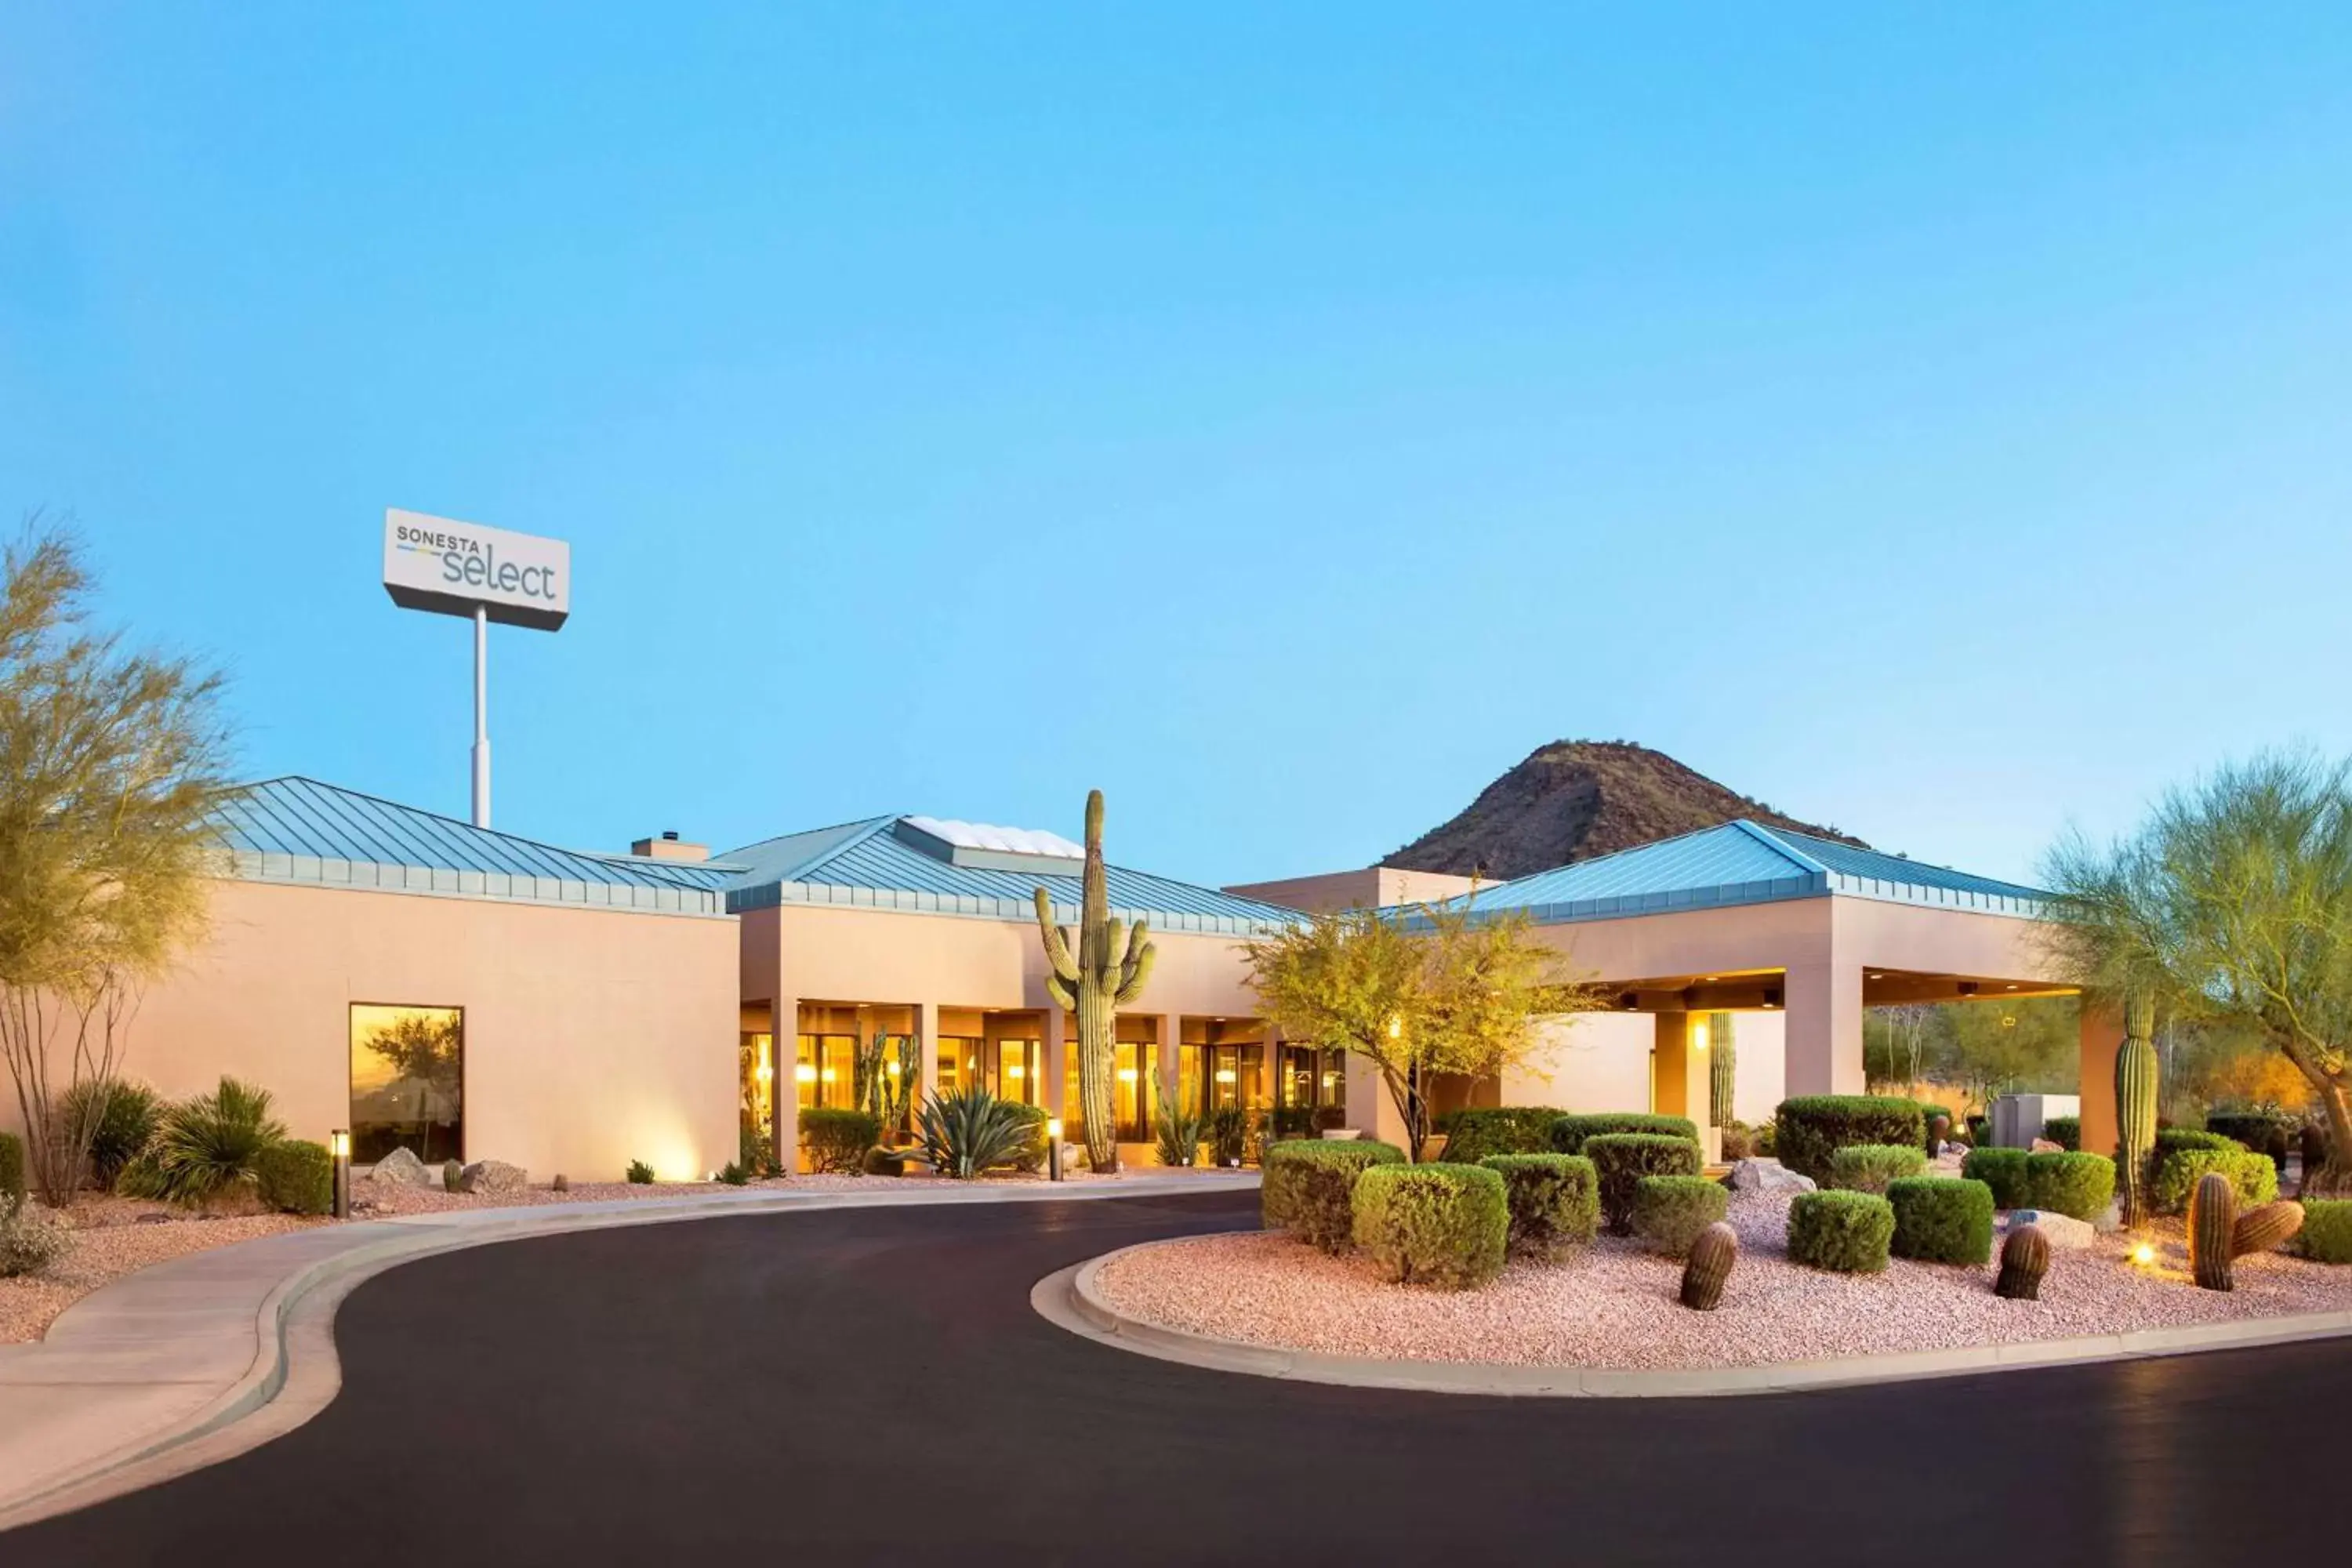 Property Building in Sonesta Select Scottsdale at Mayo Clinic Campus